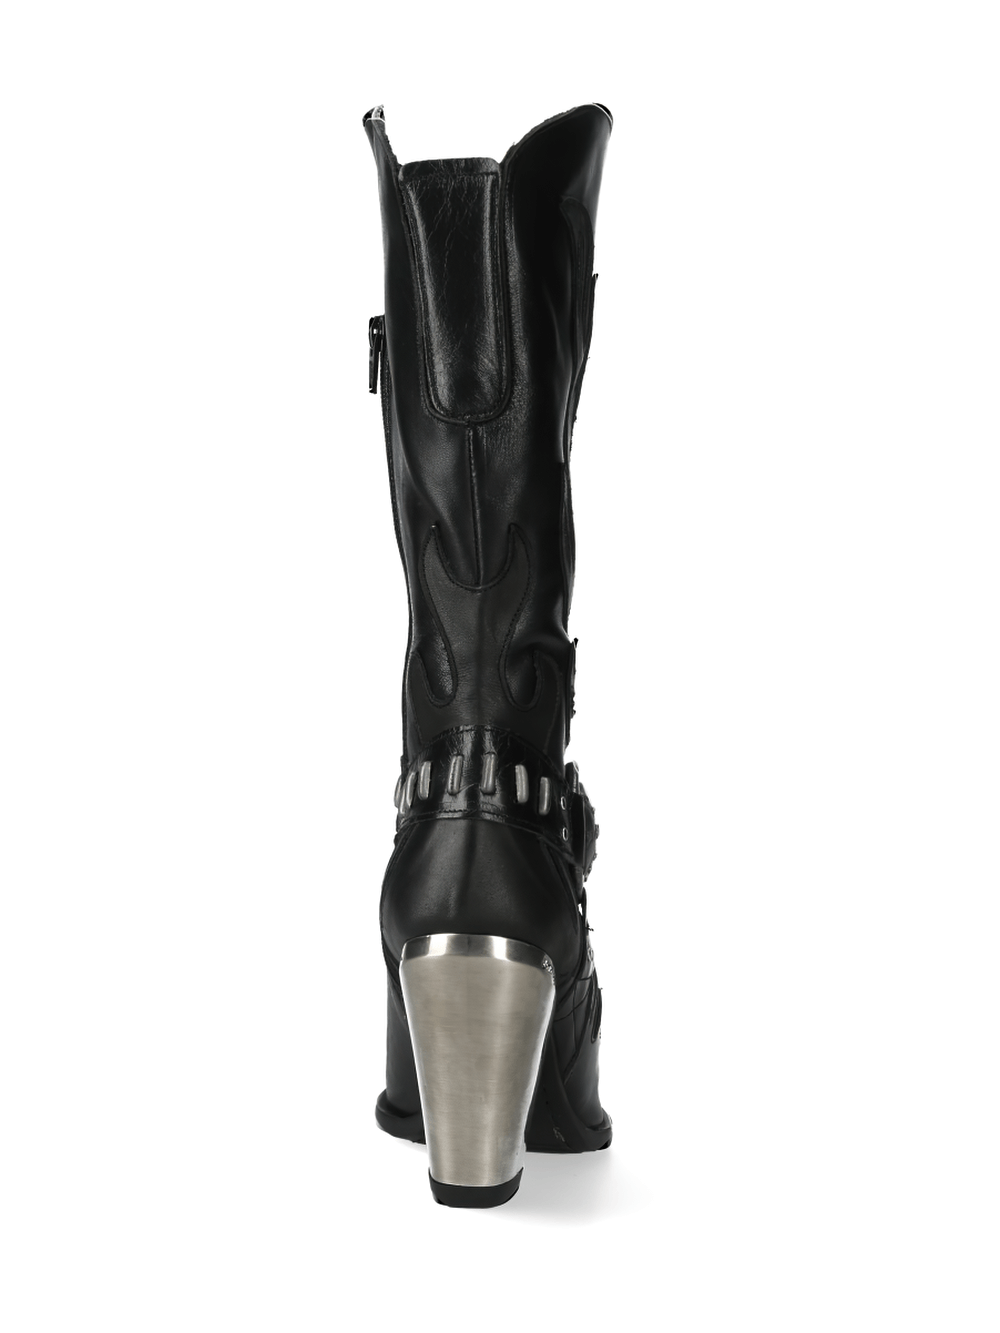 NEW ROCK Black Western Heeled Boots with Buckle Detail